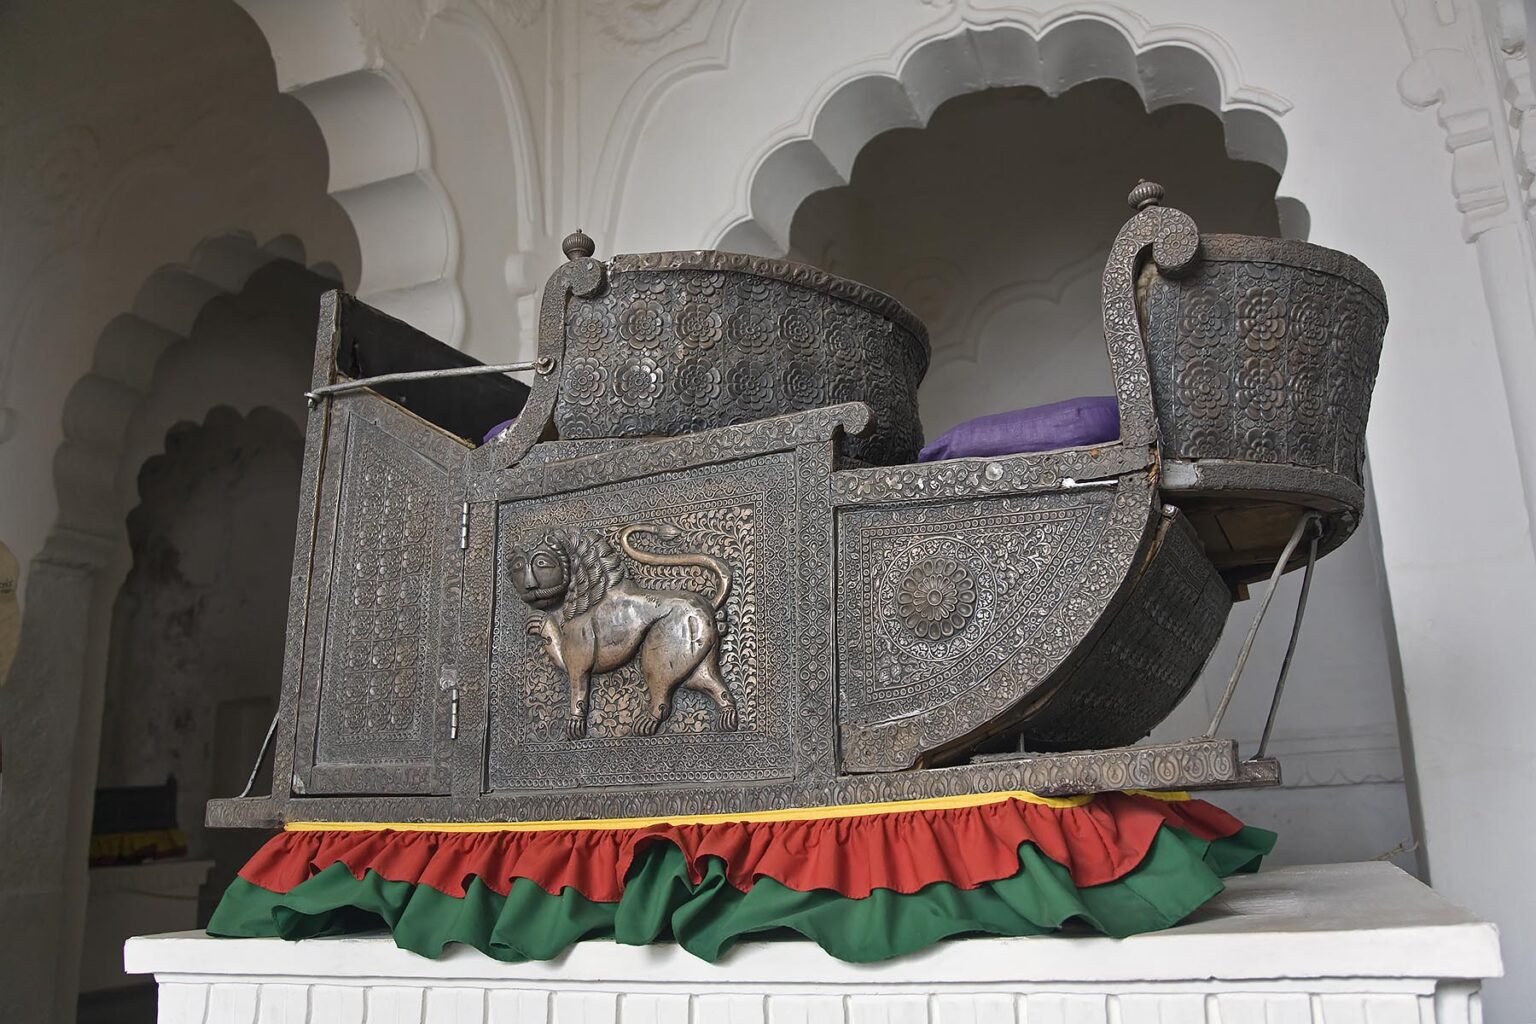 An elaborately sculpted HOWDAH with a lion motif for riding elephants in the MEHERANGARH FORT museum - JOHDPUR, RAJASTHAN, INDIA